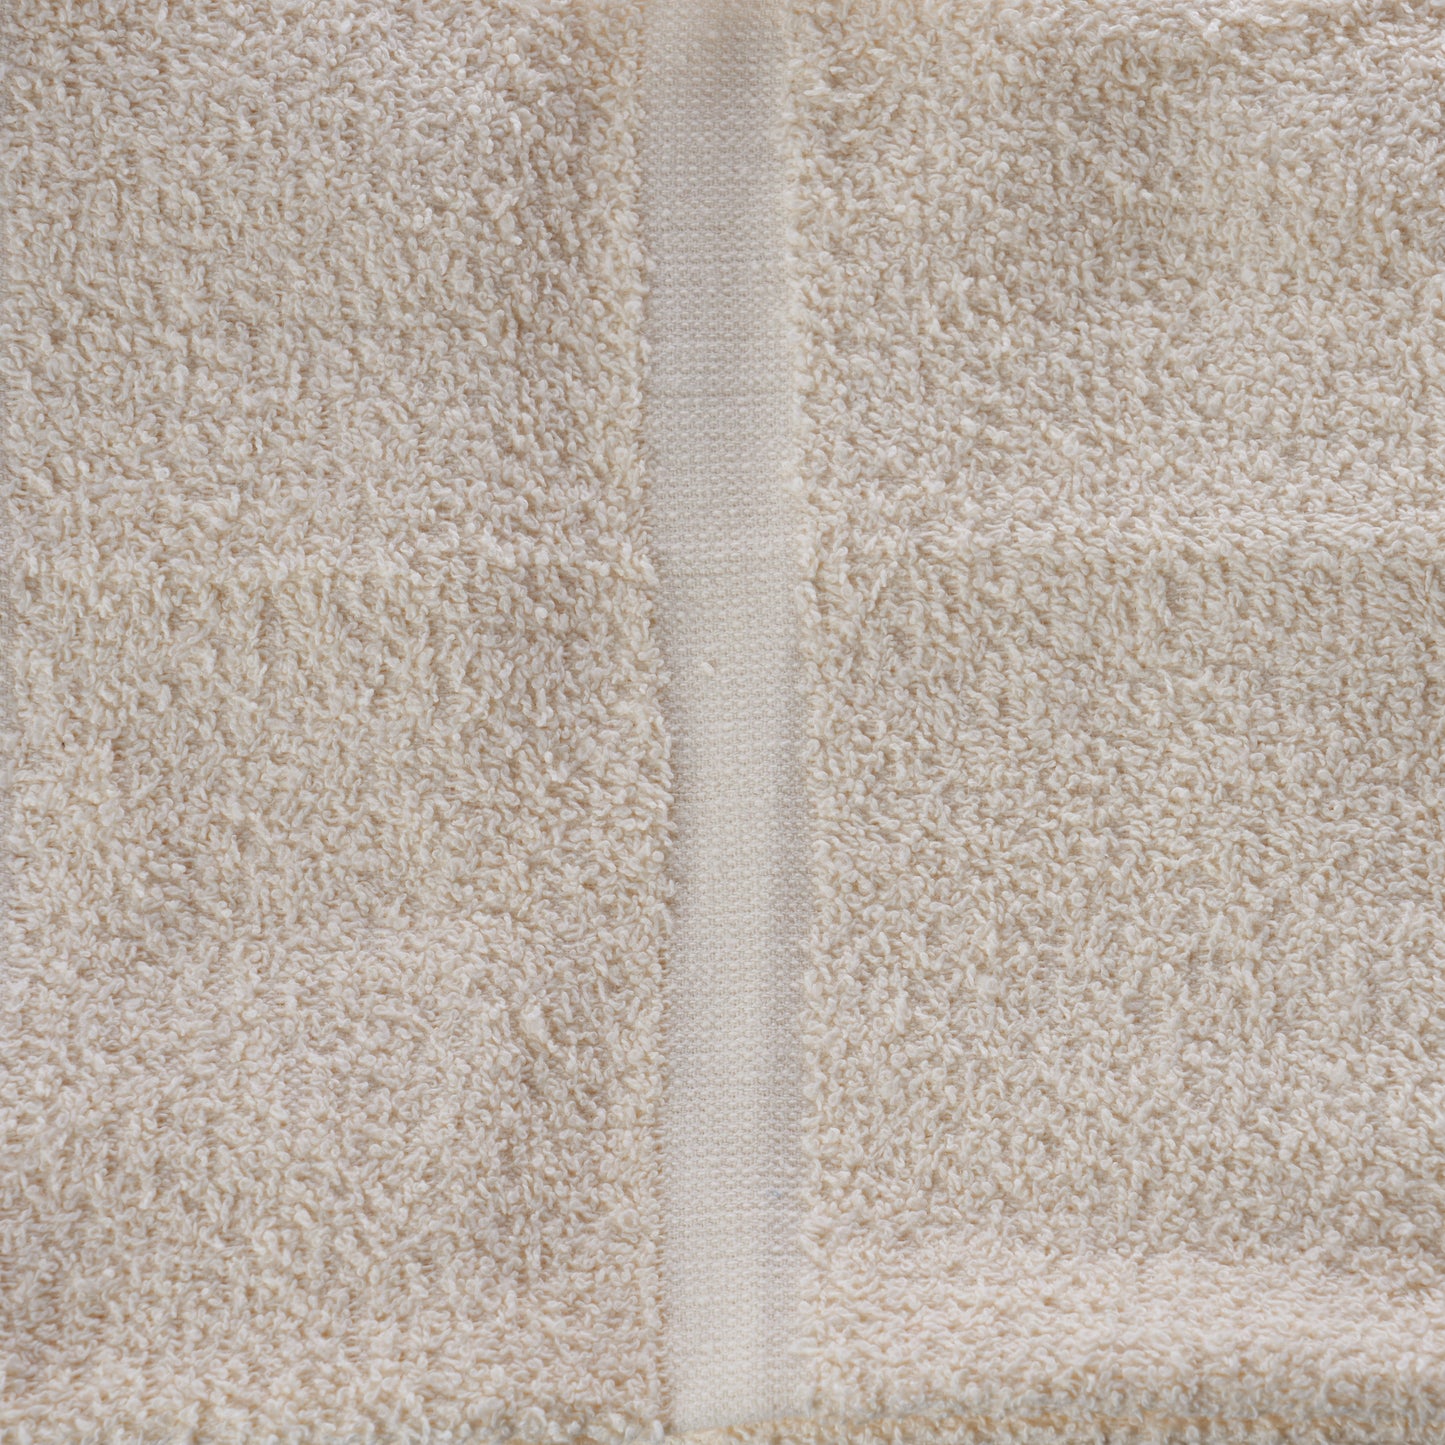 Beige Hand Towels (Pack of 12)